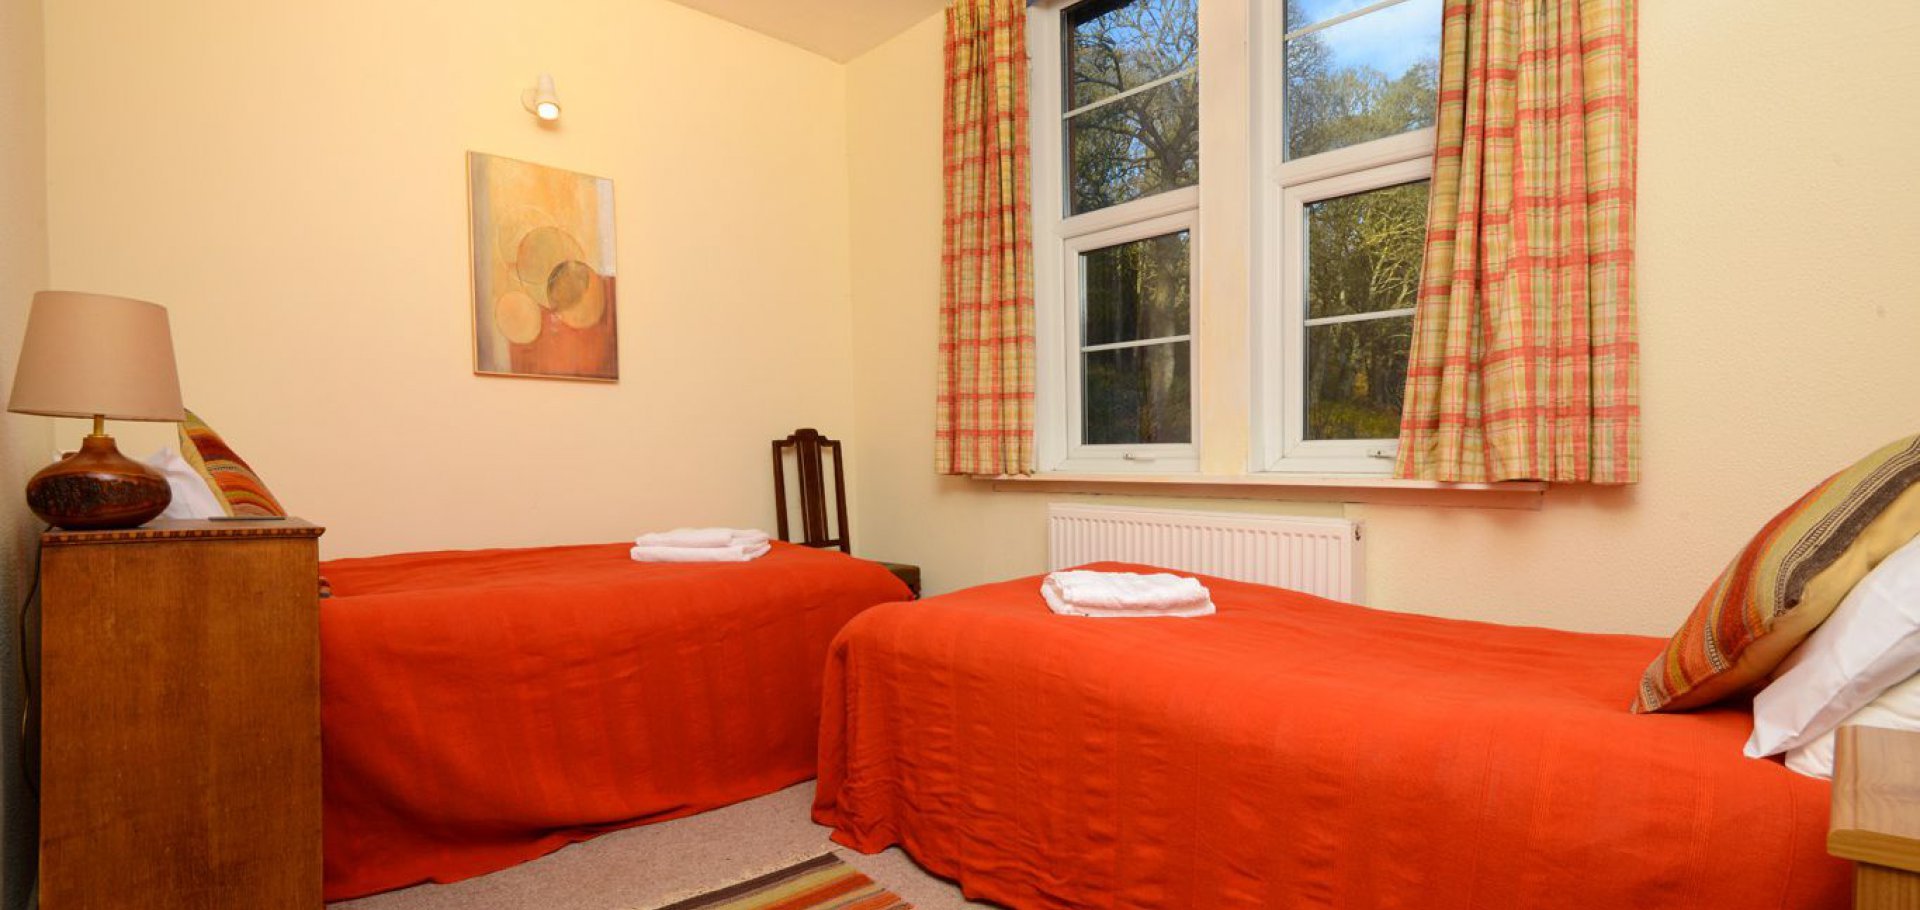 Self catering holiday cottage in south west scotland